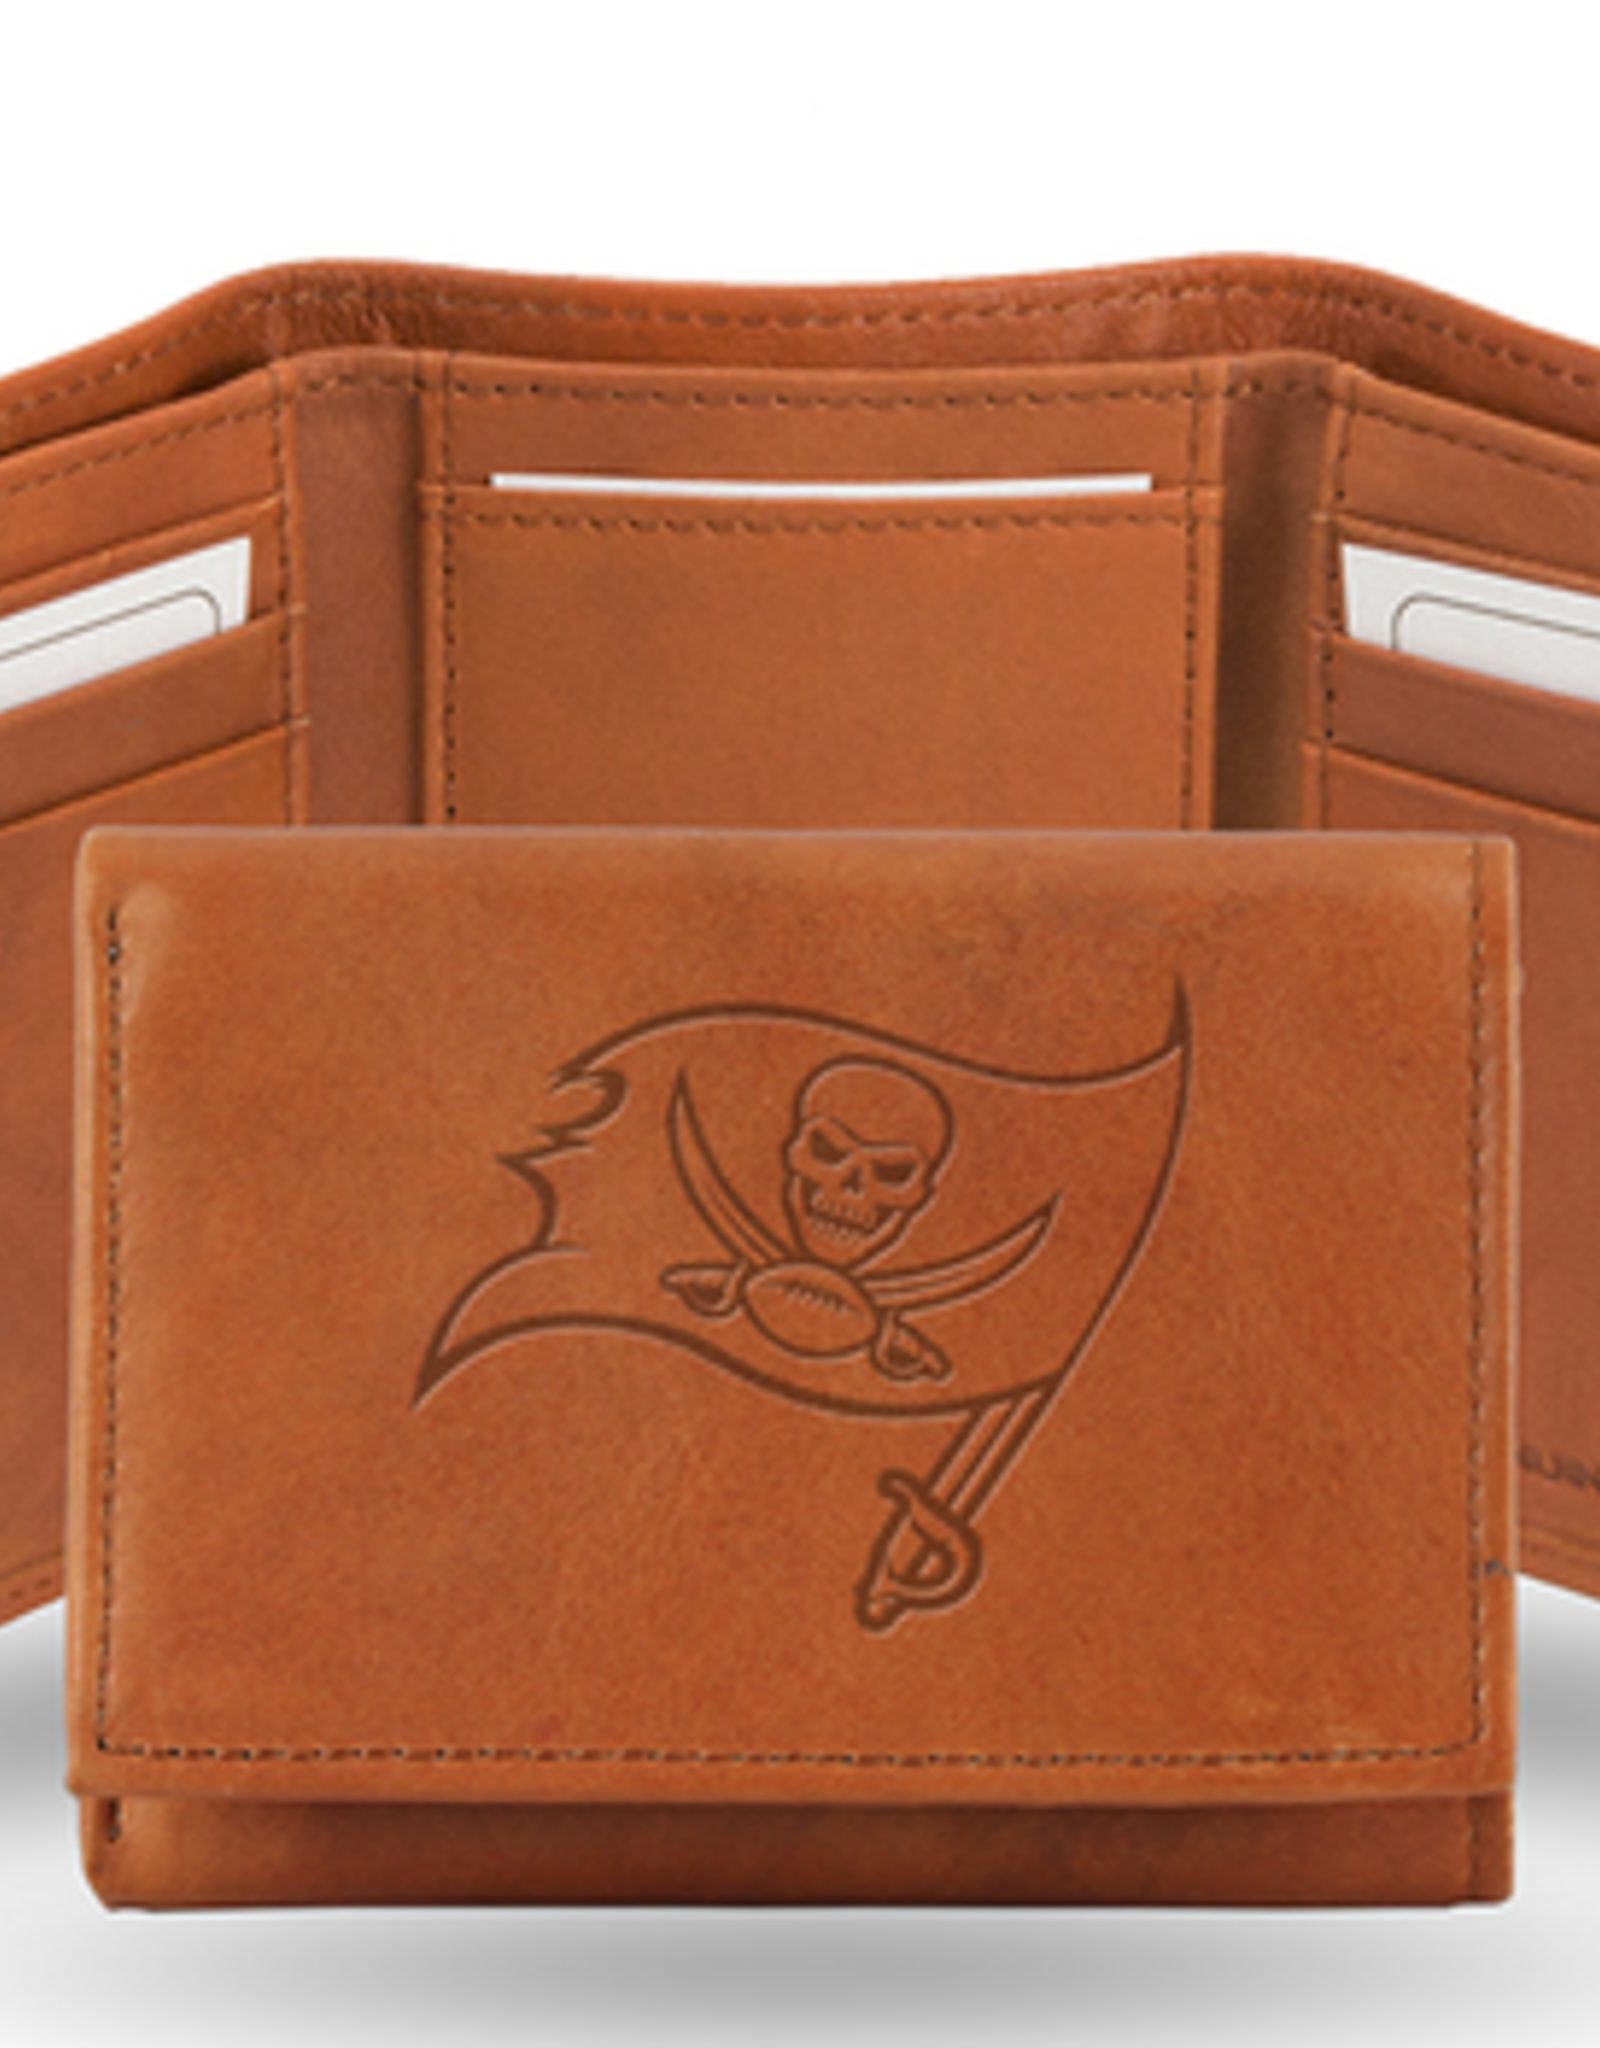 RICO INDUSTRIES Tampa Bay Buccaneers Vintage Leather Trifold Wallet